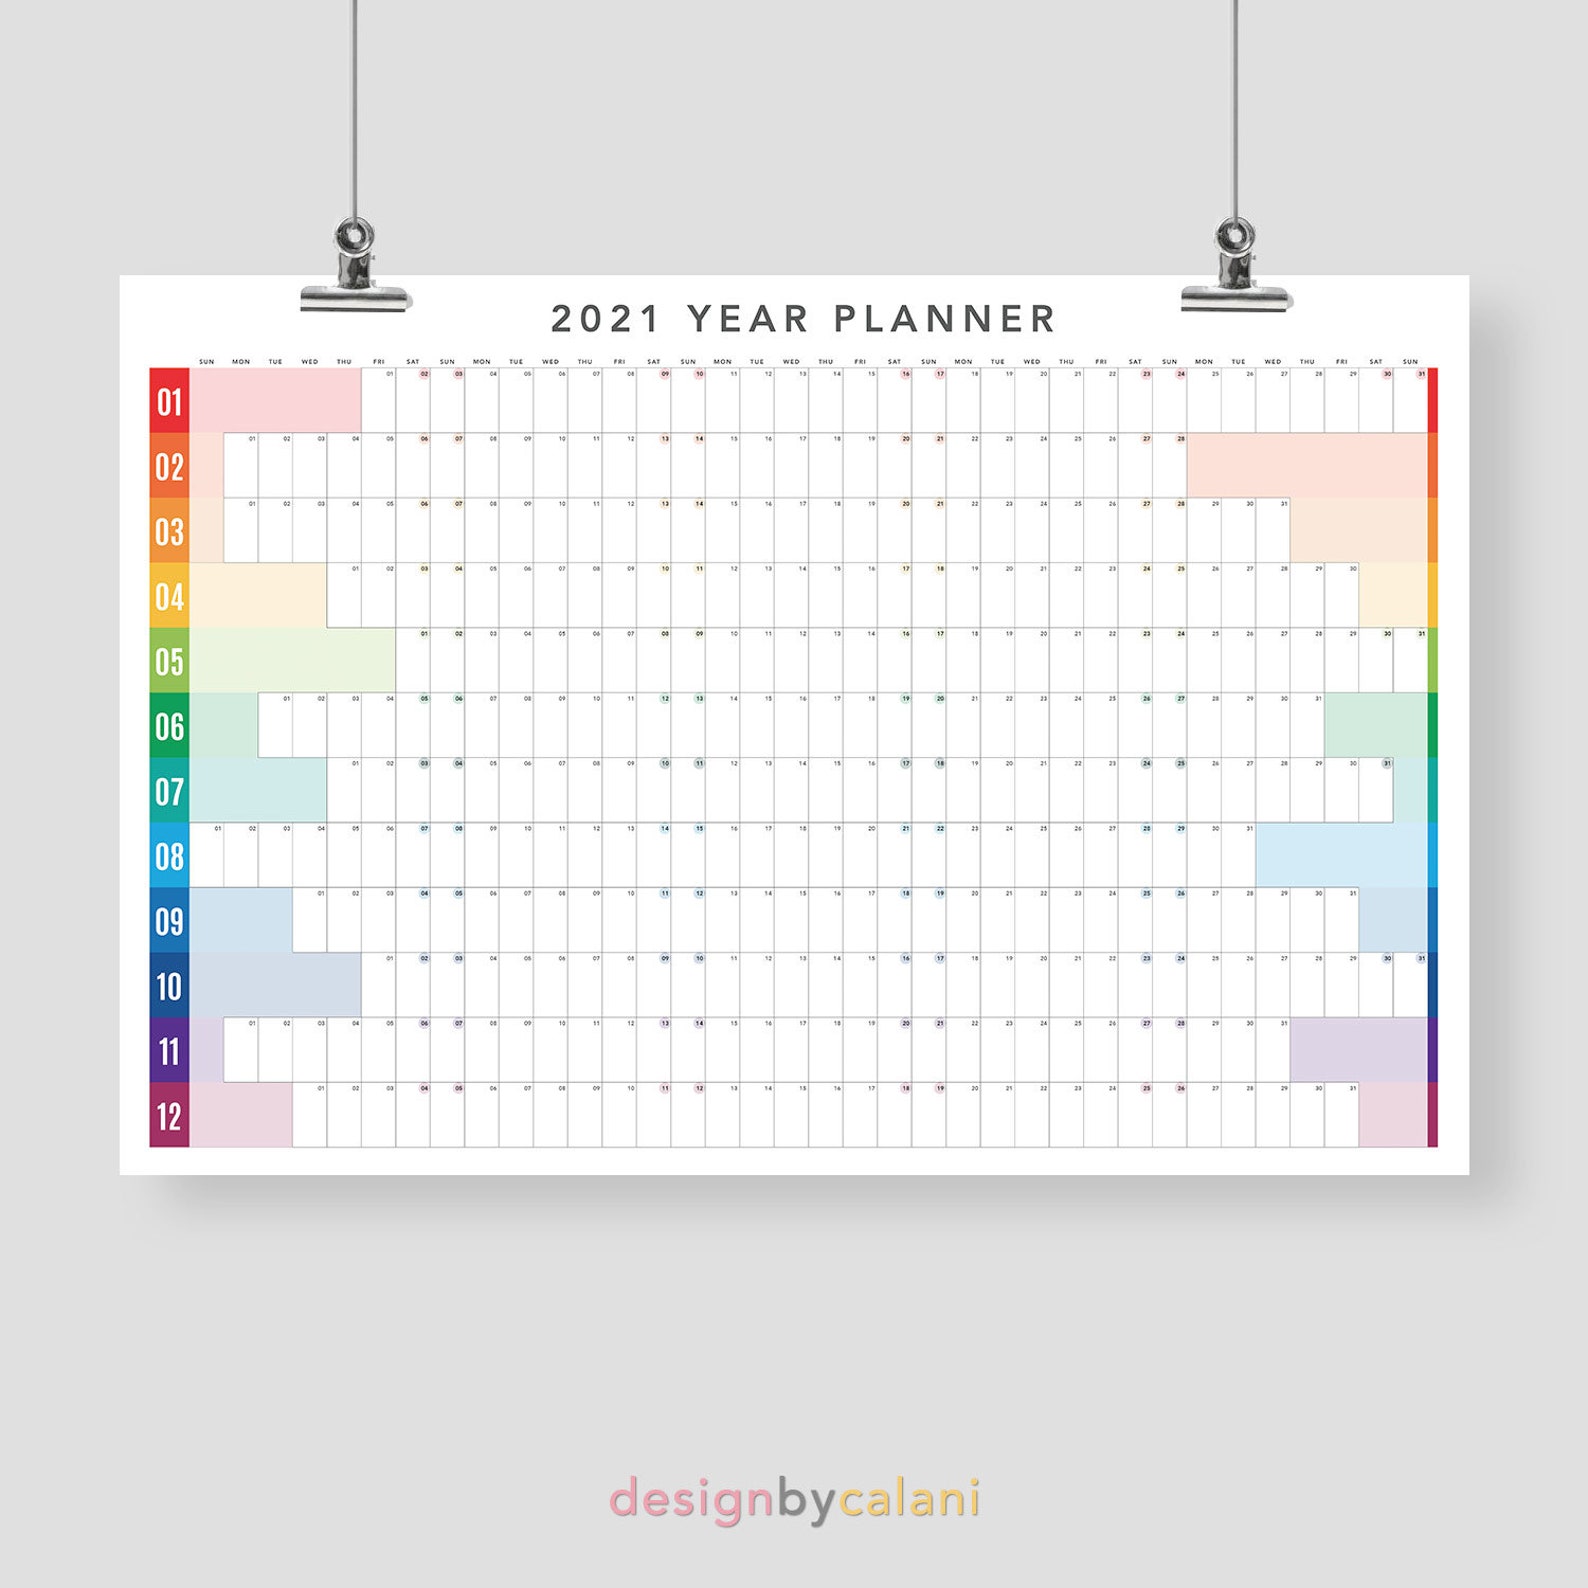 2021 Year Planner 2021 Printable Planner Annual Wall Etsy